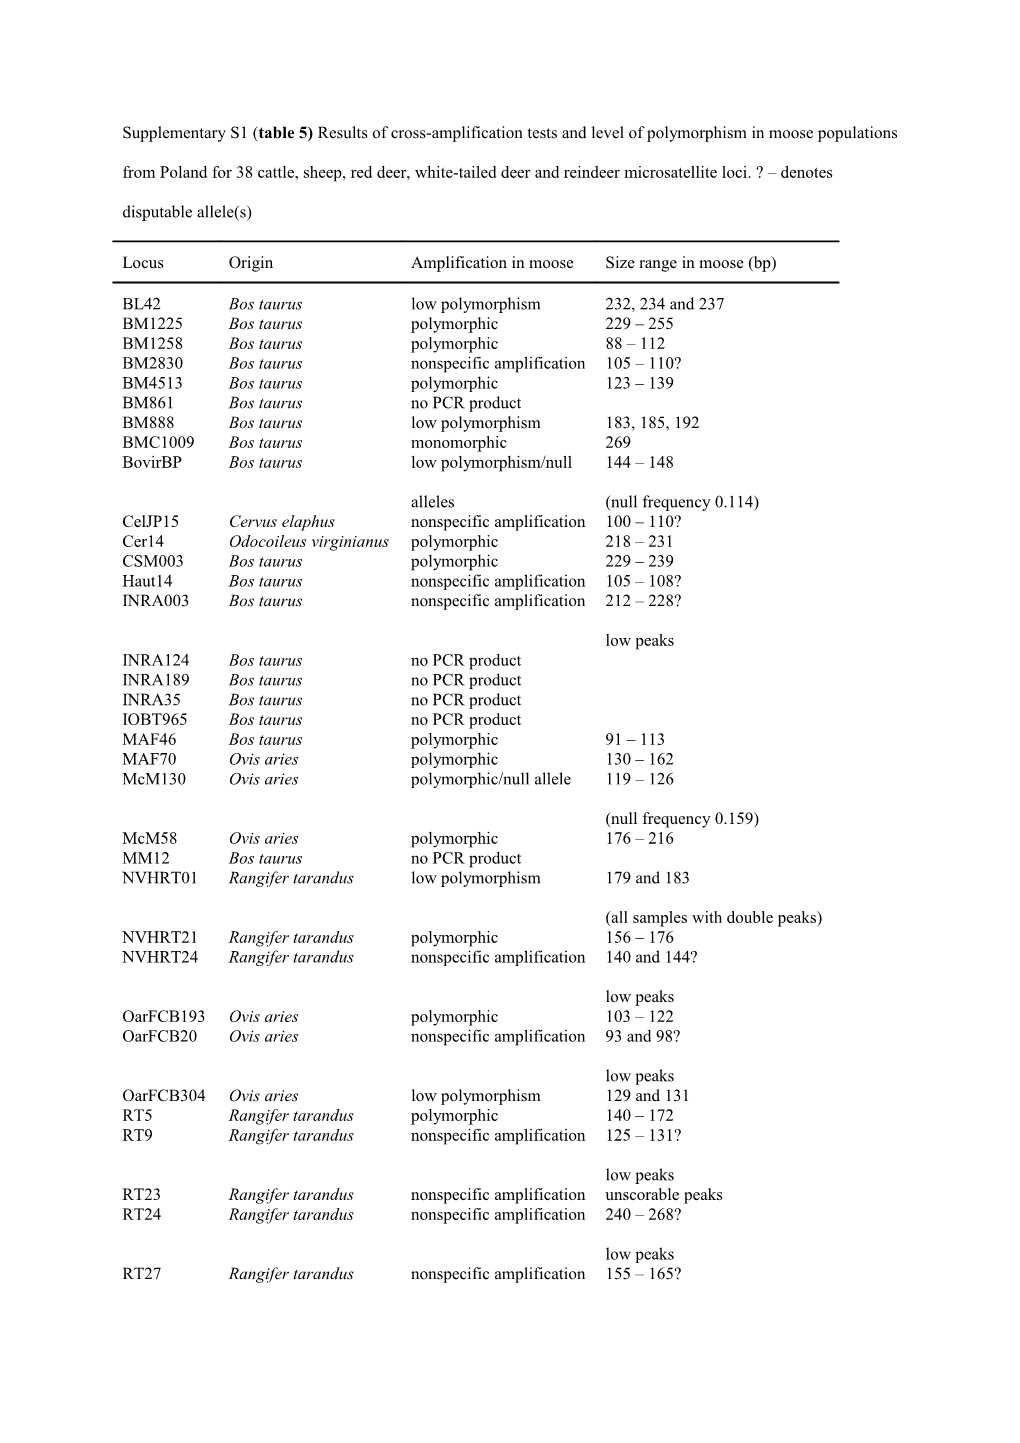 Supplementary S1(Table 5)Results of Cross-Amplification Tests and Level of Polymorphism